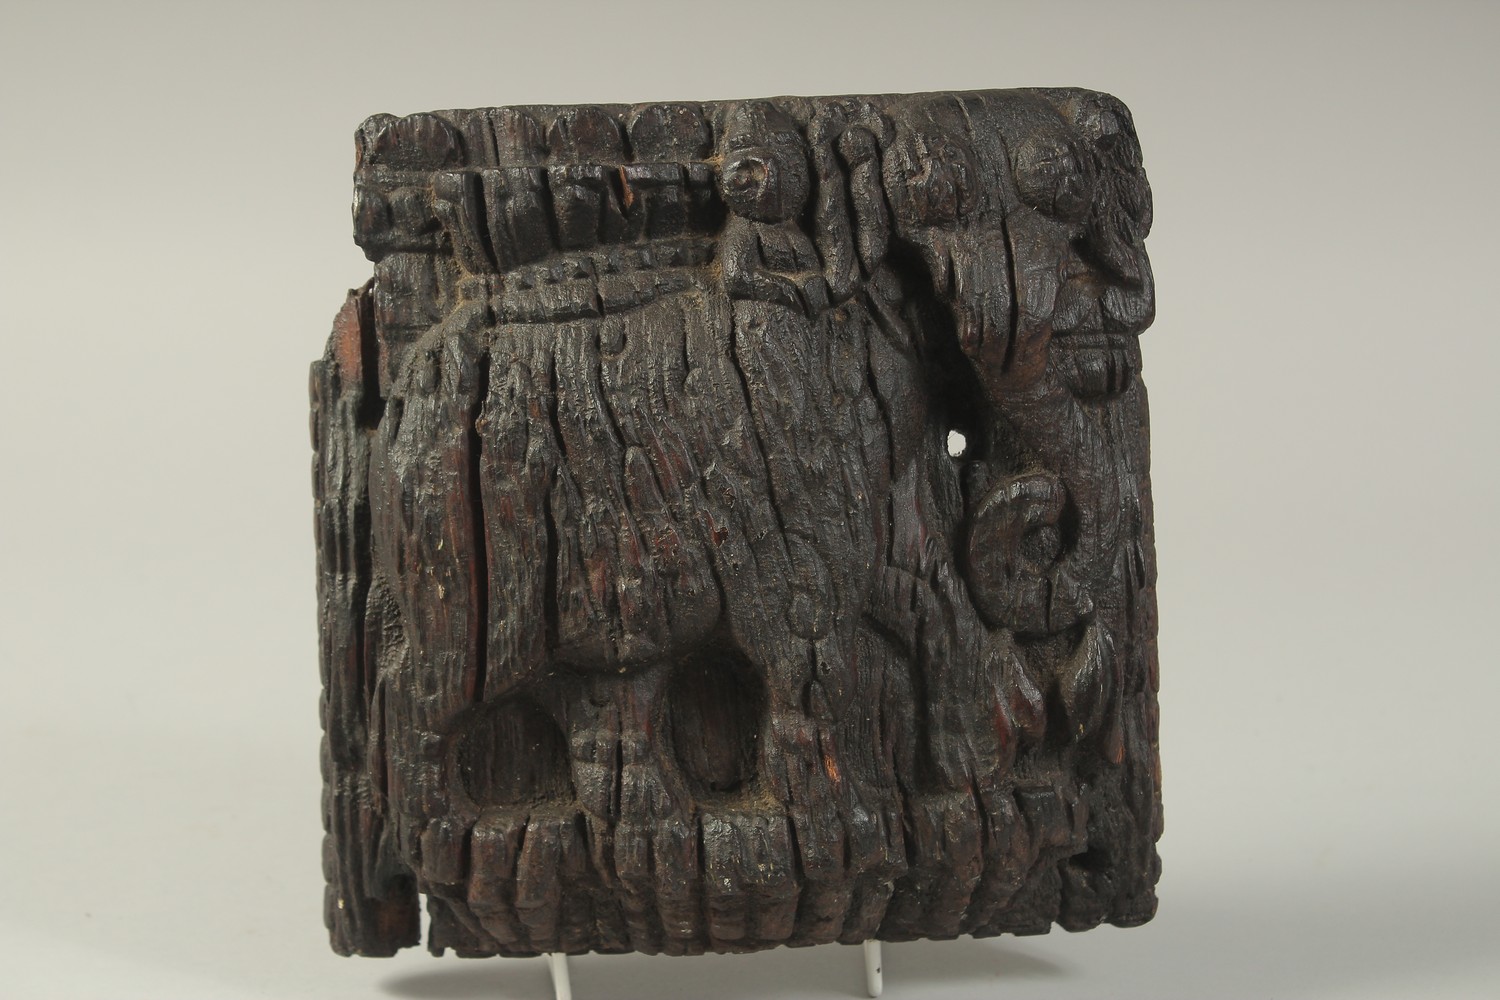 A RARE 14TH-15TH CENTURY INDIAN DECCANI SULTANATE CARVED WOODEN PANEL, depicting an elephant and